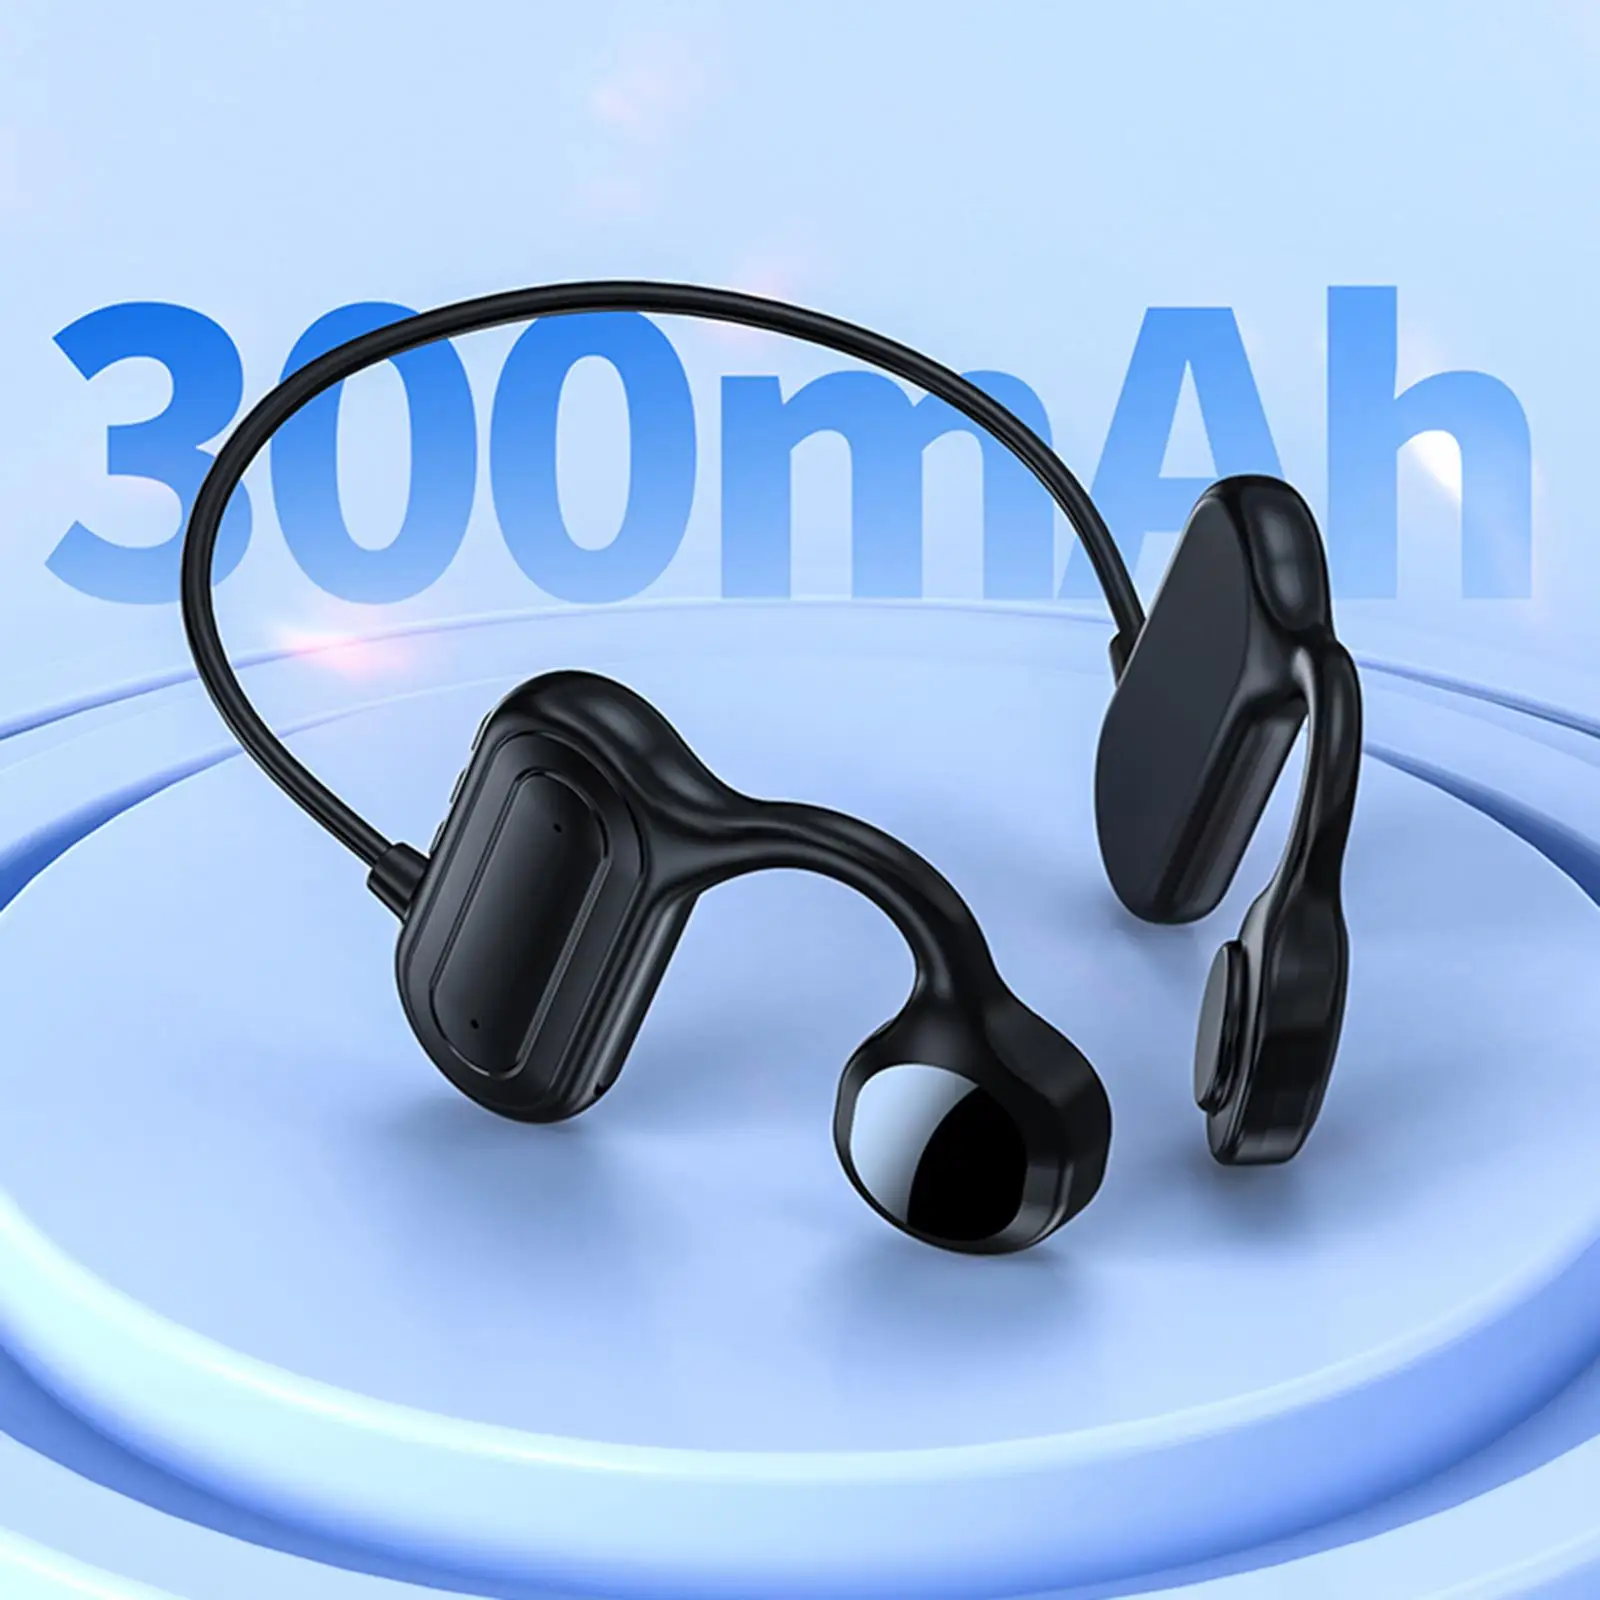 Bone Conduction Headphones, Stereo Hands Free Wireless Bluetooth HiFi Running Headsets Drivers Work Built in Mic Easy Button